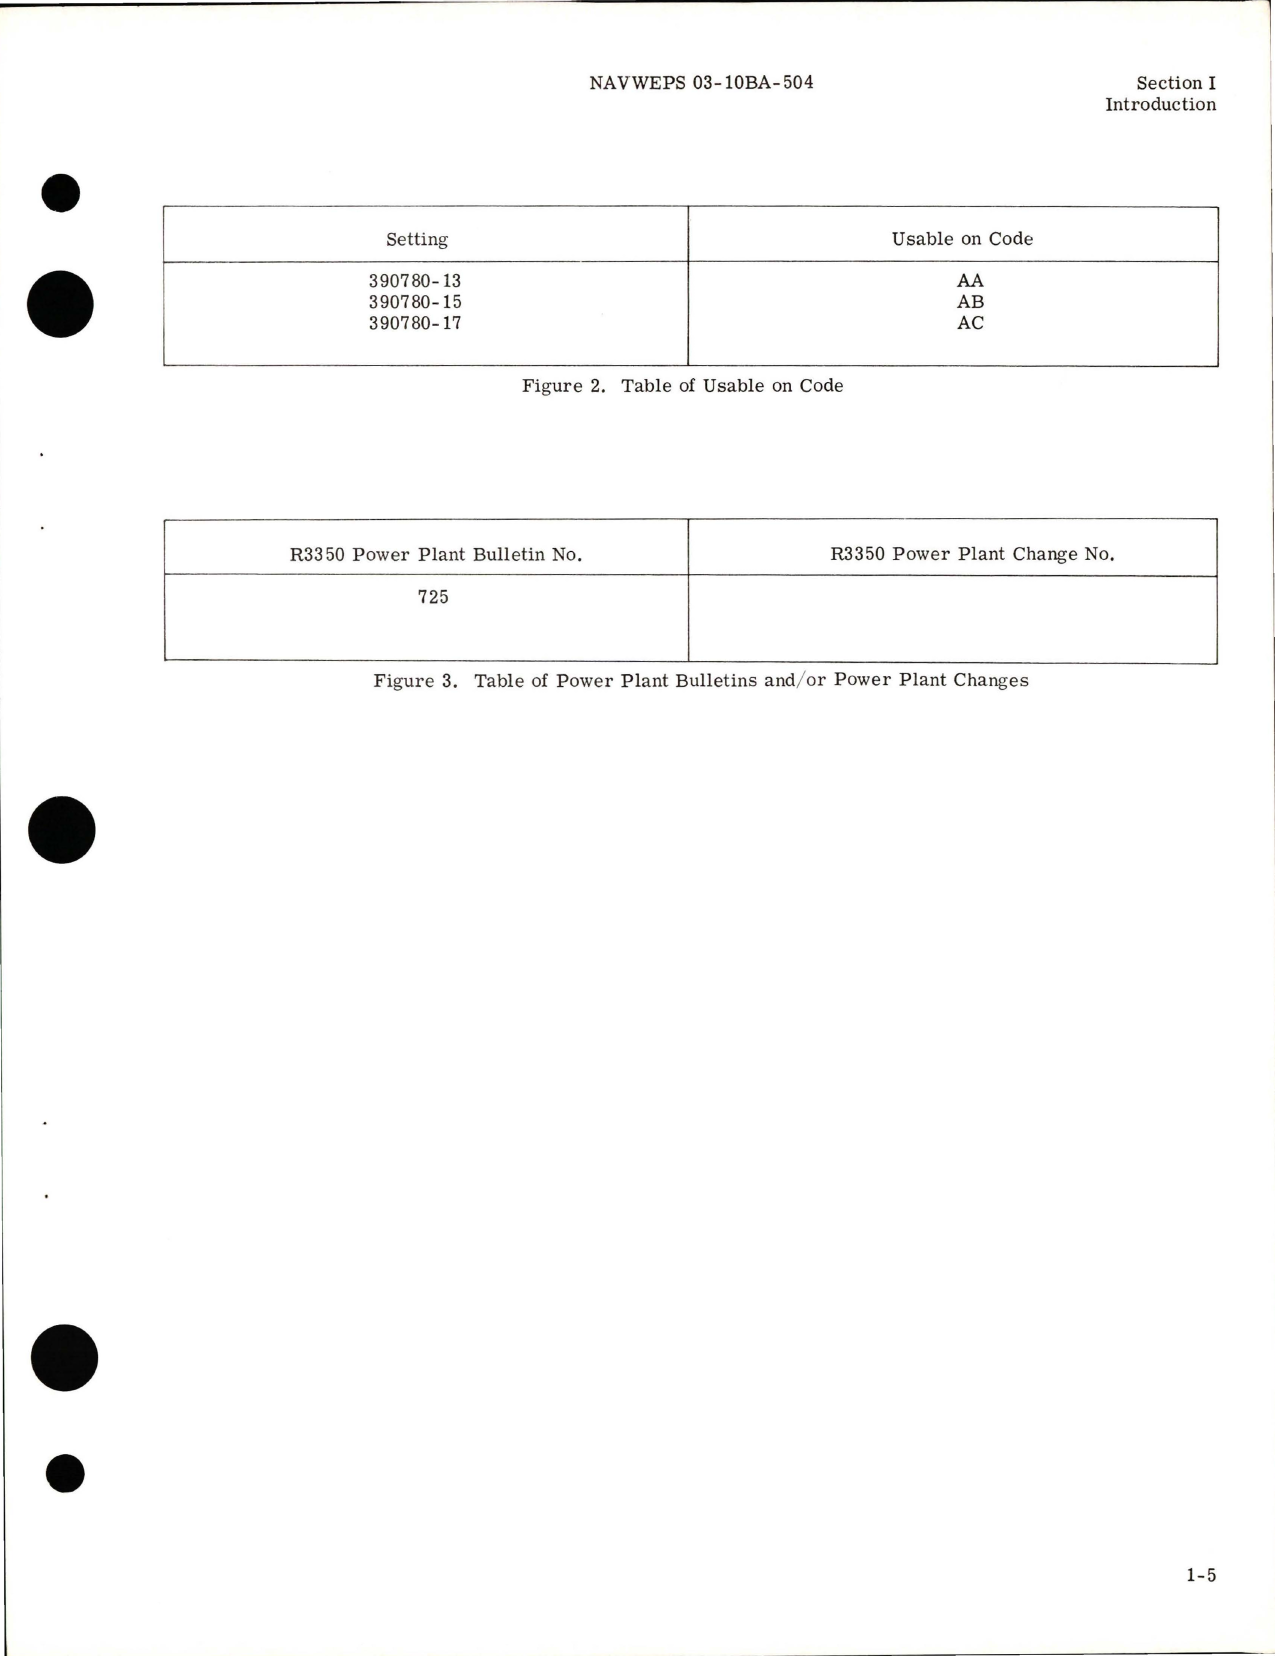 Sample page 9 from AirCorps Library document: Illustrated Parts Breakdown for Injection Carburetor - Model PR-58U1 - Parts 390780-13, 390780-15, and 390780-17